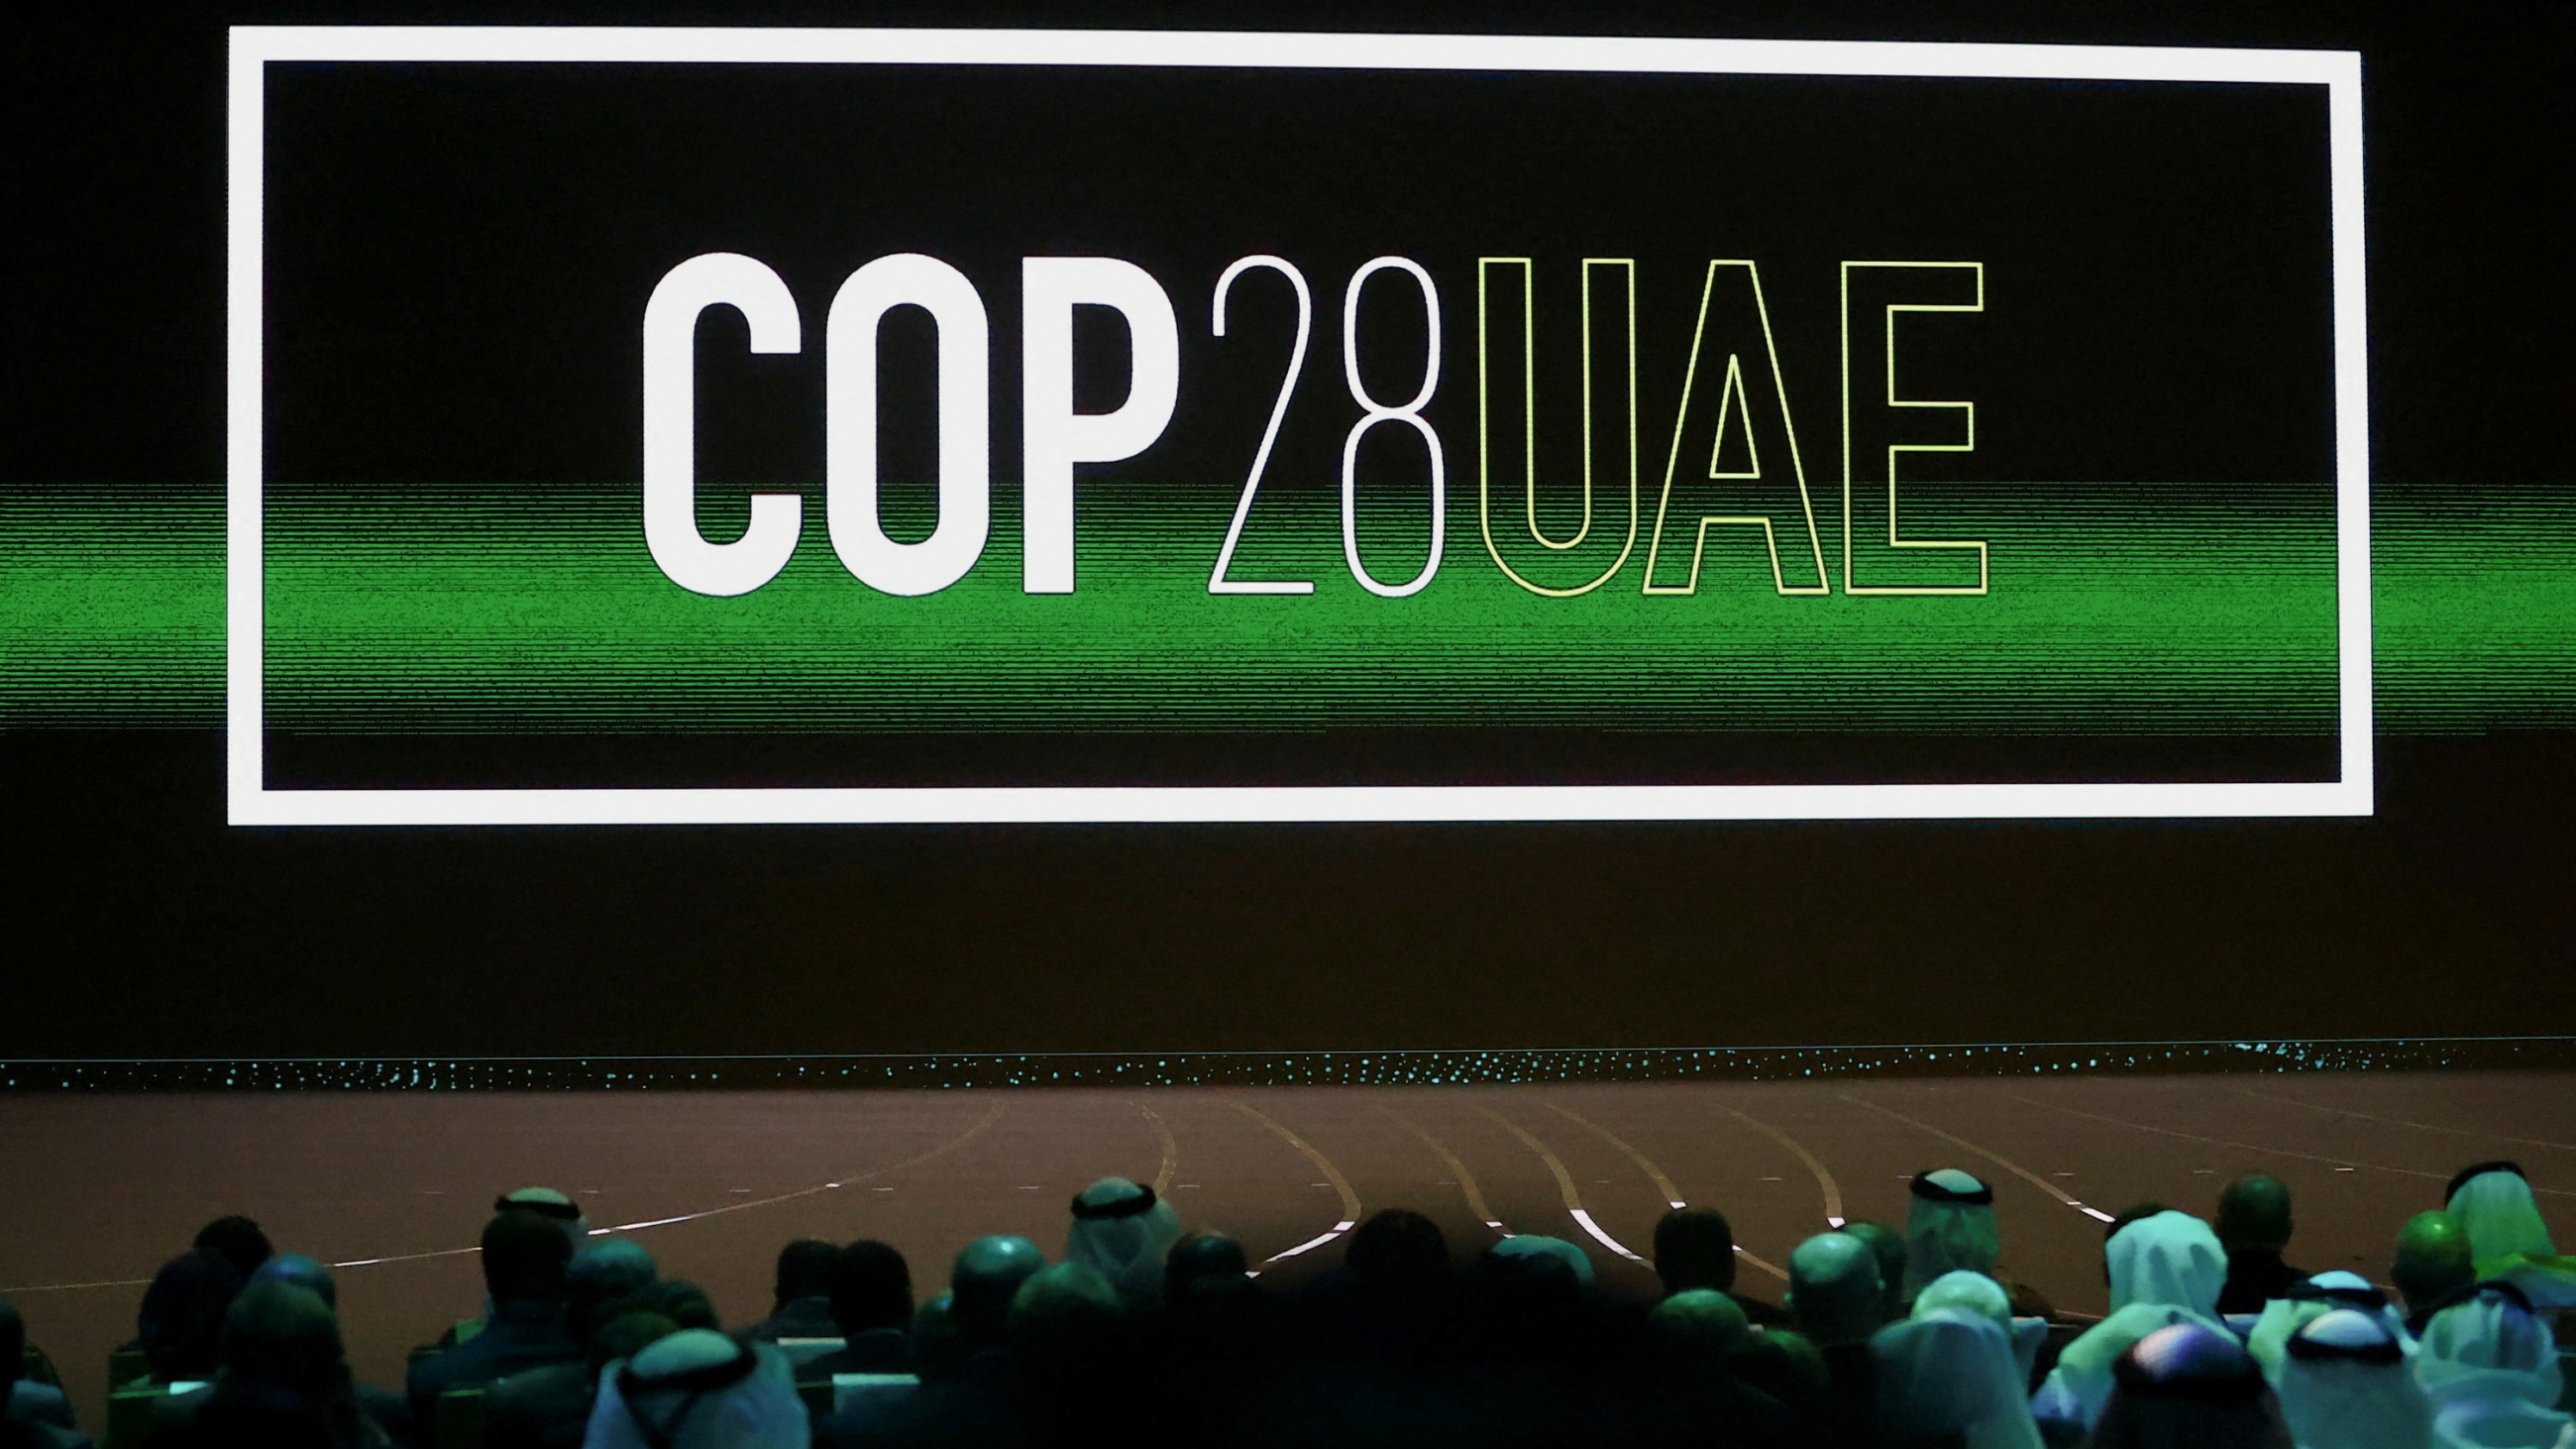 The Cop28 UAE logo is displayed on the screen during the opening ceremony of Abu Dhabi Sustainability Week (ADSW) in Abu Dhabi on 16 January 2023 (Reuters)